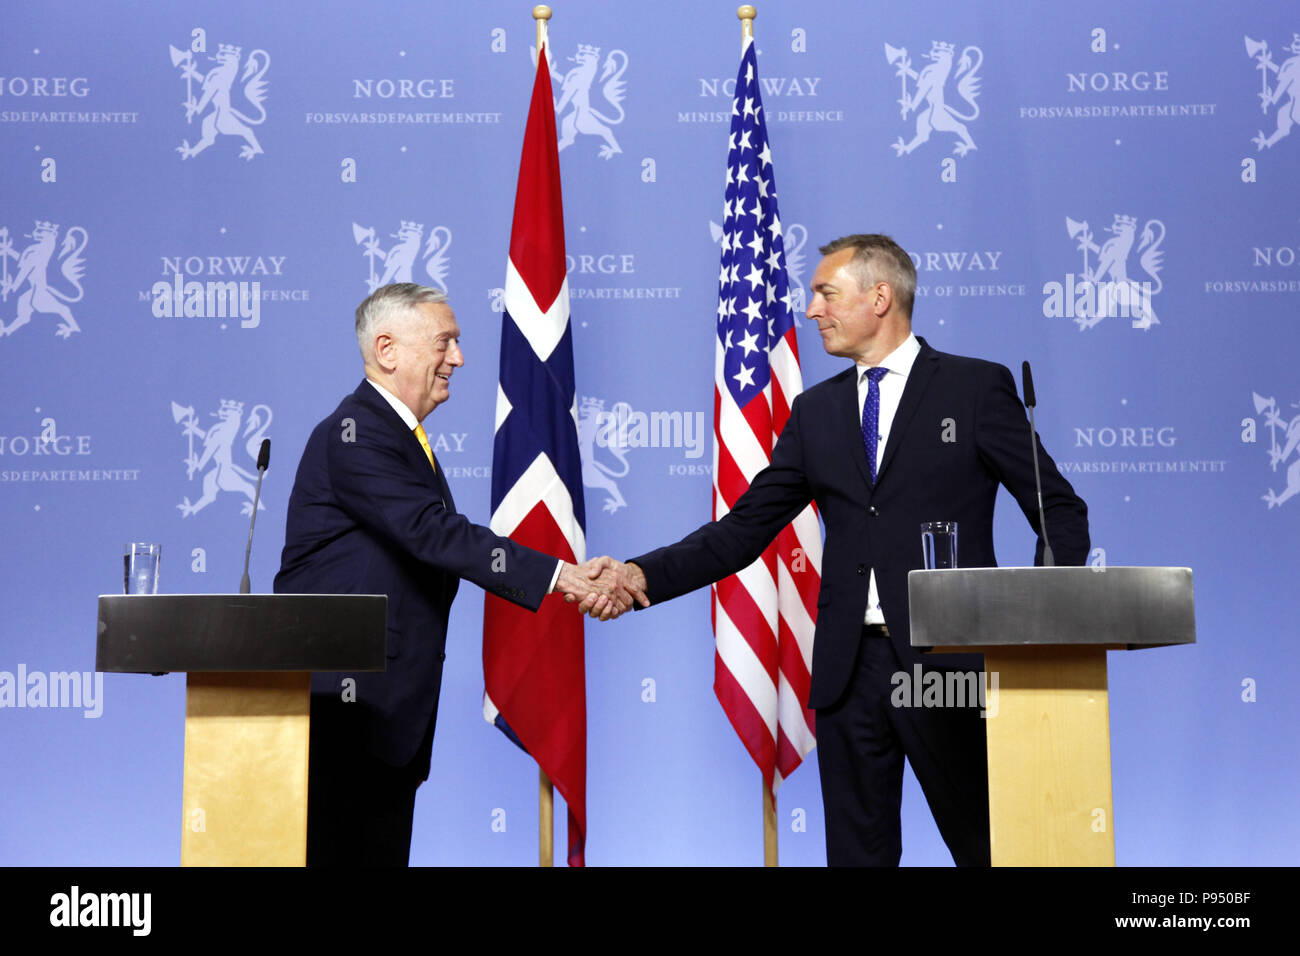 Oslo, Norway. 14th July, 2018. U.S. Secretary of Defense James Mattis (L) shakes hands with Norwegian Minister of Defence Frank Bakke-Jensen at a joint press conference in Oslo, Norway, July 14, 2018. Norway on Saturday reconfirmed its commitment to gradually increase defense spending to two percent of GDP in the North Atlantic Treaty Organization (NATO) during a visit by U.S. Secretary of Defense James Mattis to the Nordic country. Credit: Liang Youchang/Xinhua/Alamy Live News Stock Photo